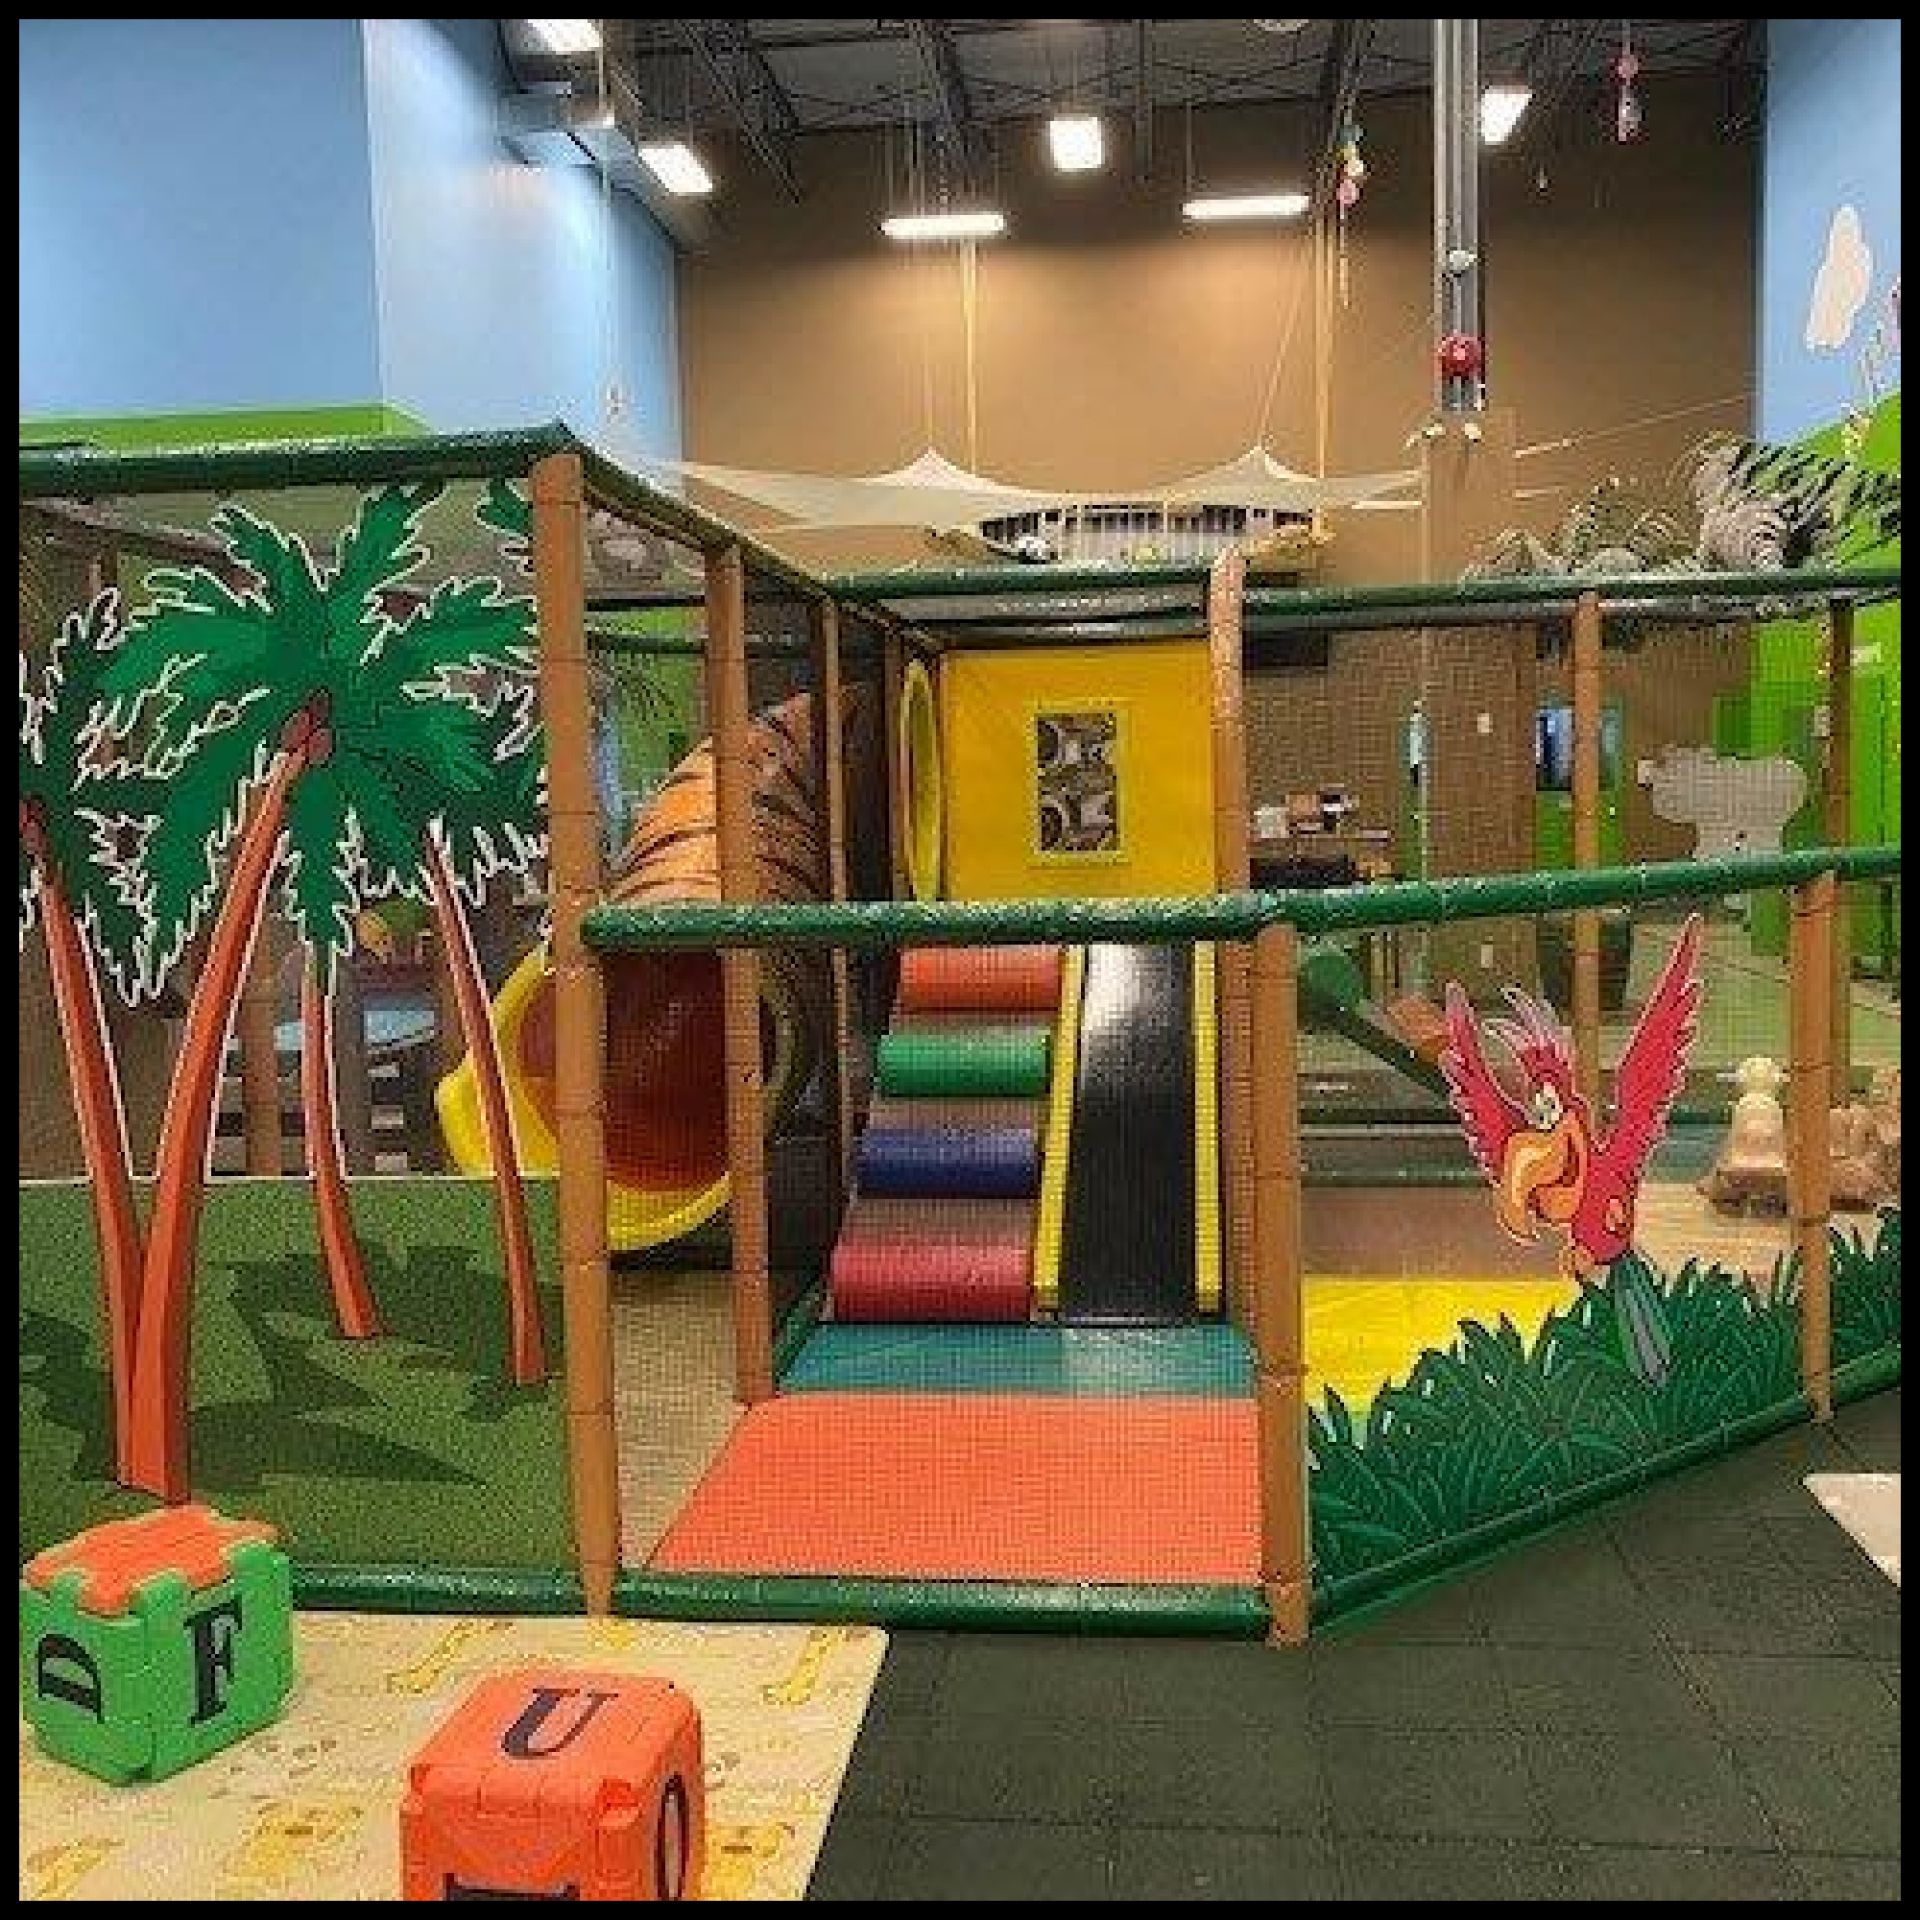 ONE SMALL INFANT INDOOR PLAYGROUND (SUBJECT TO BULK-BID LOT 99)